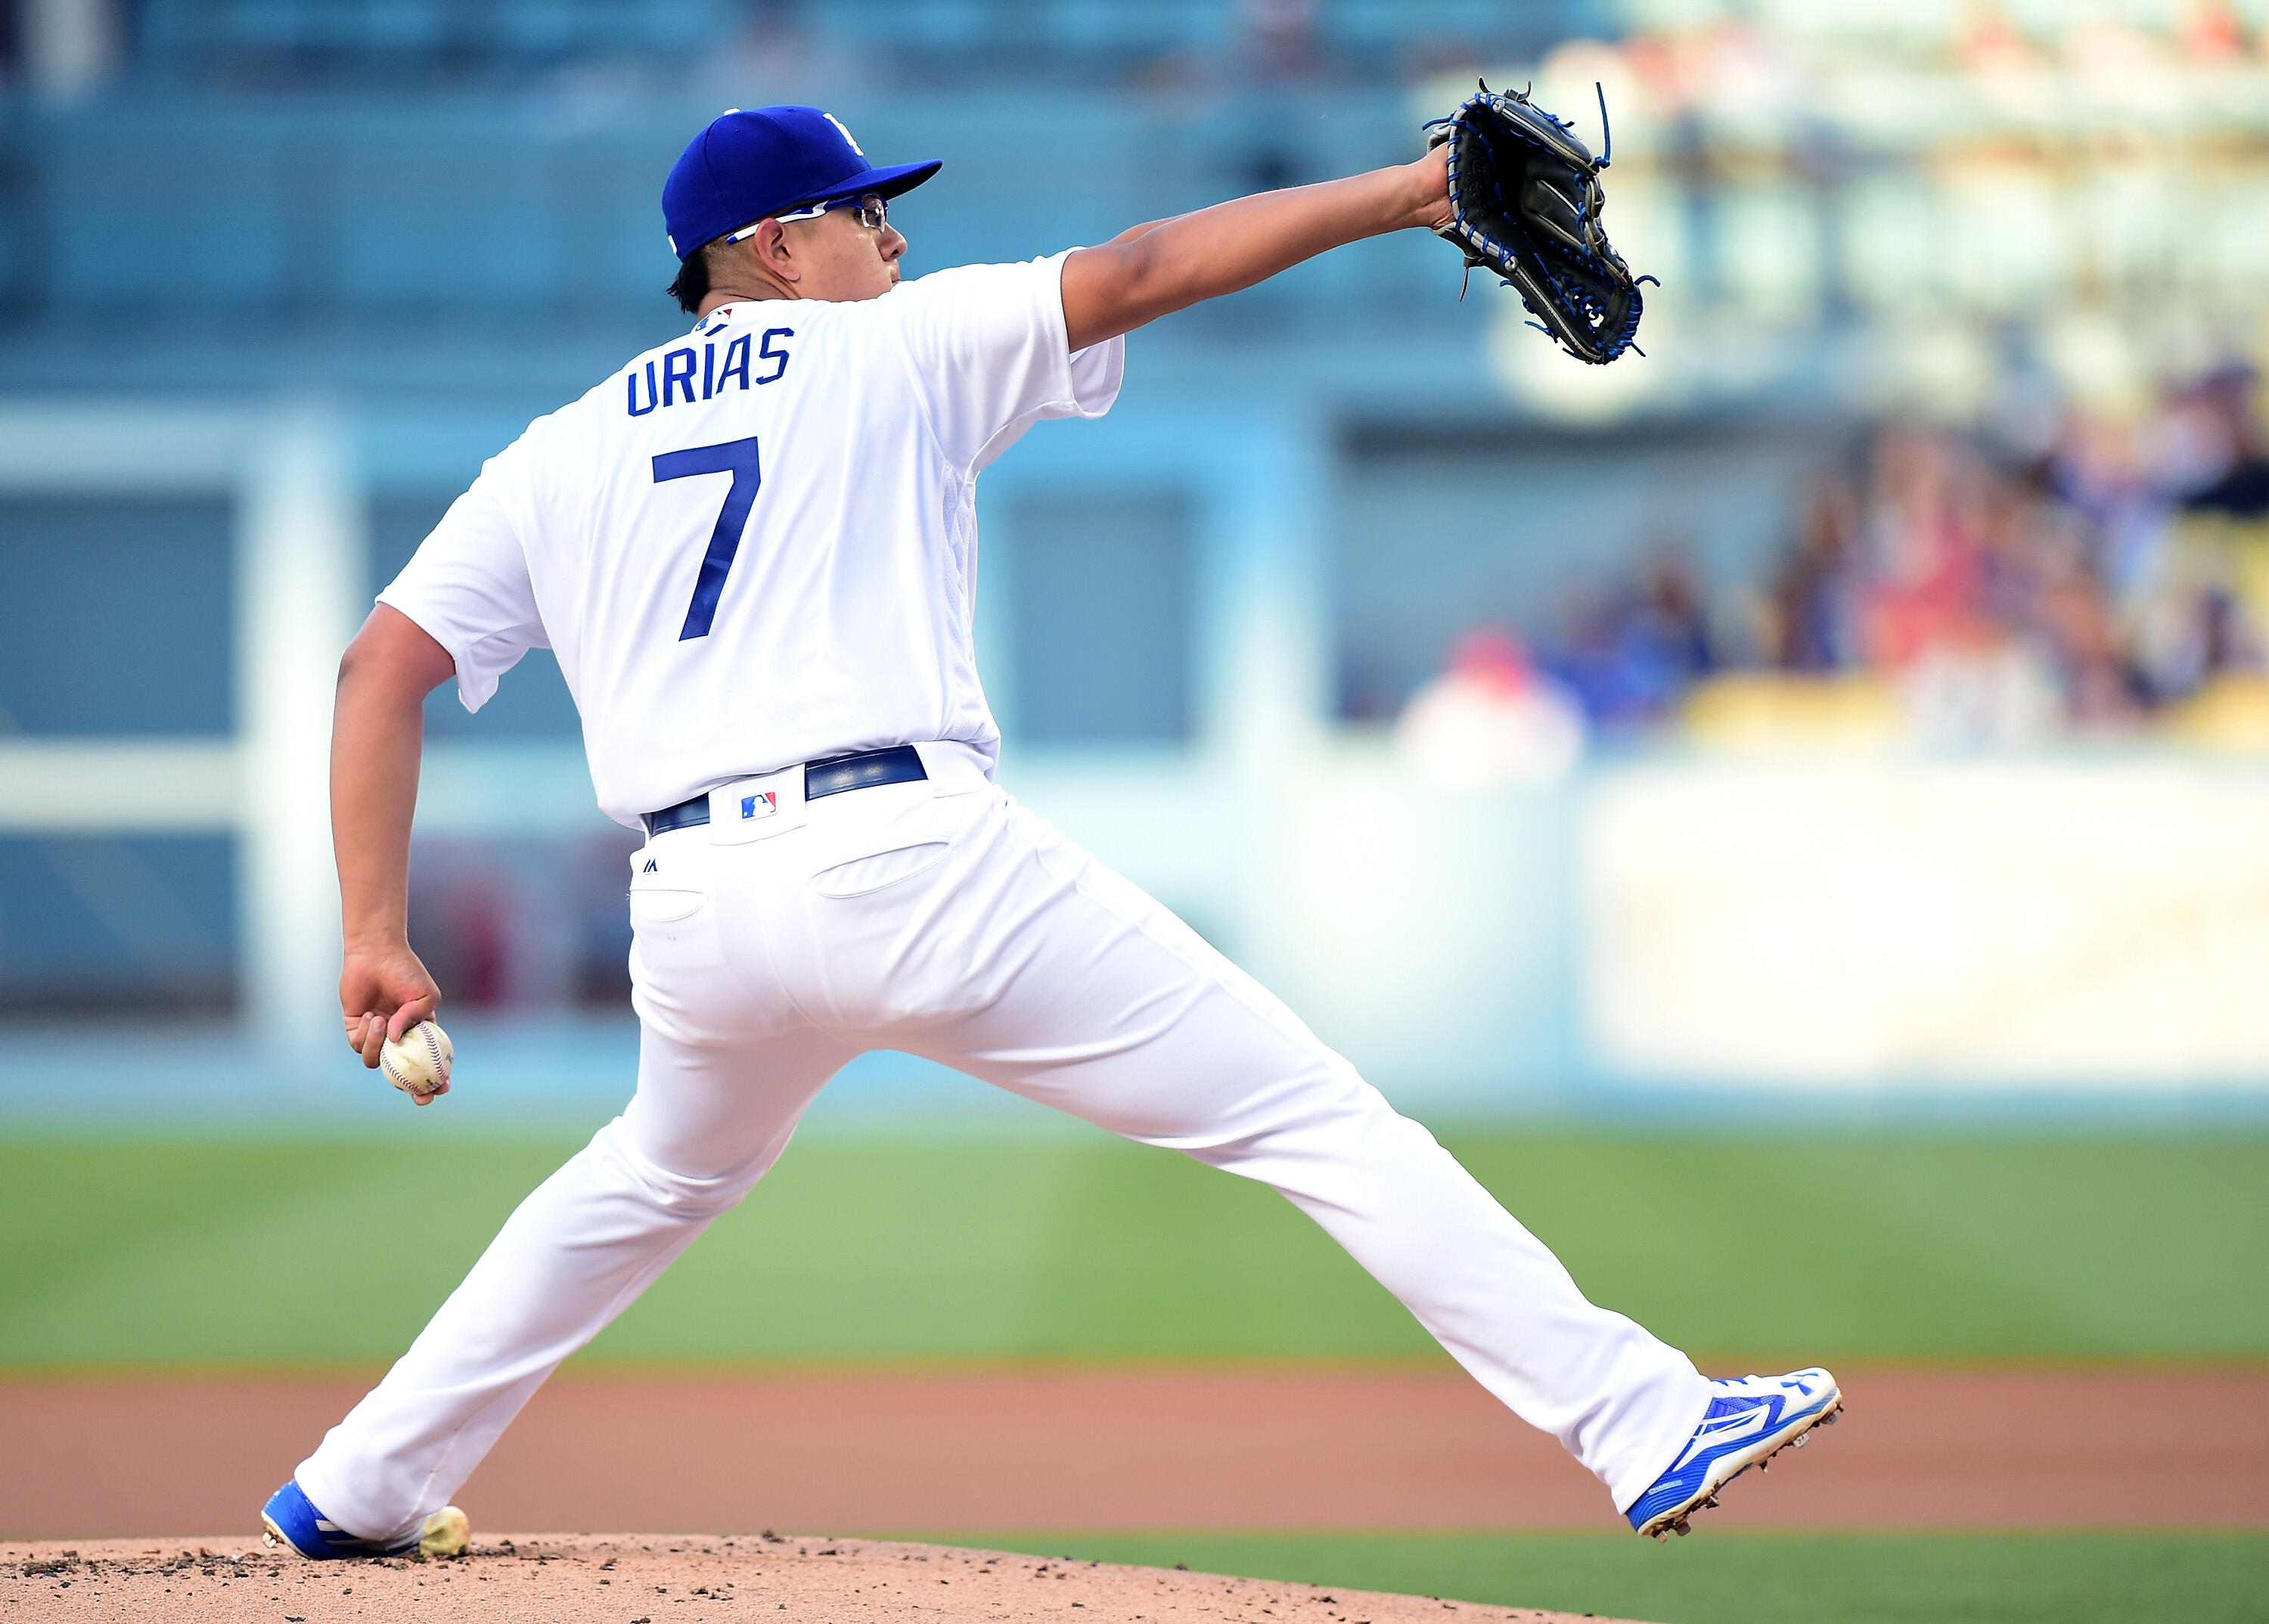 LOS ANGELES, CA - JUNE 22:  Julio Urias #7 of the Los Angeles Dodgers pitches to the Washington Nationals during the first inning at Dodger Stadium on June 22, 2016 in Los Angeles, California.  (Photo by Harry How/Getty Images)